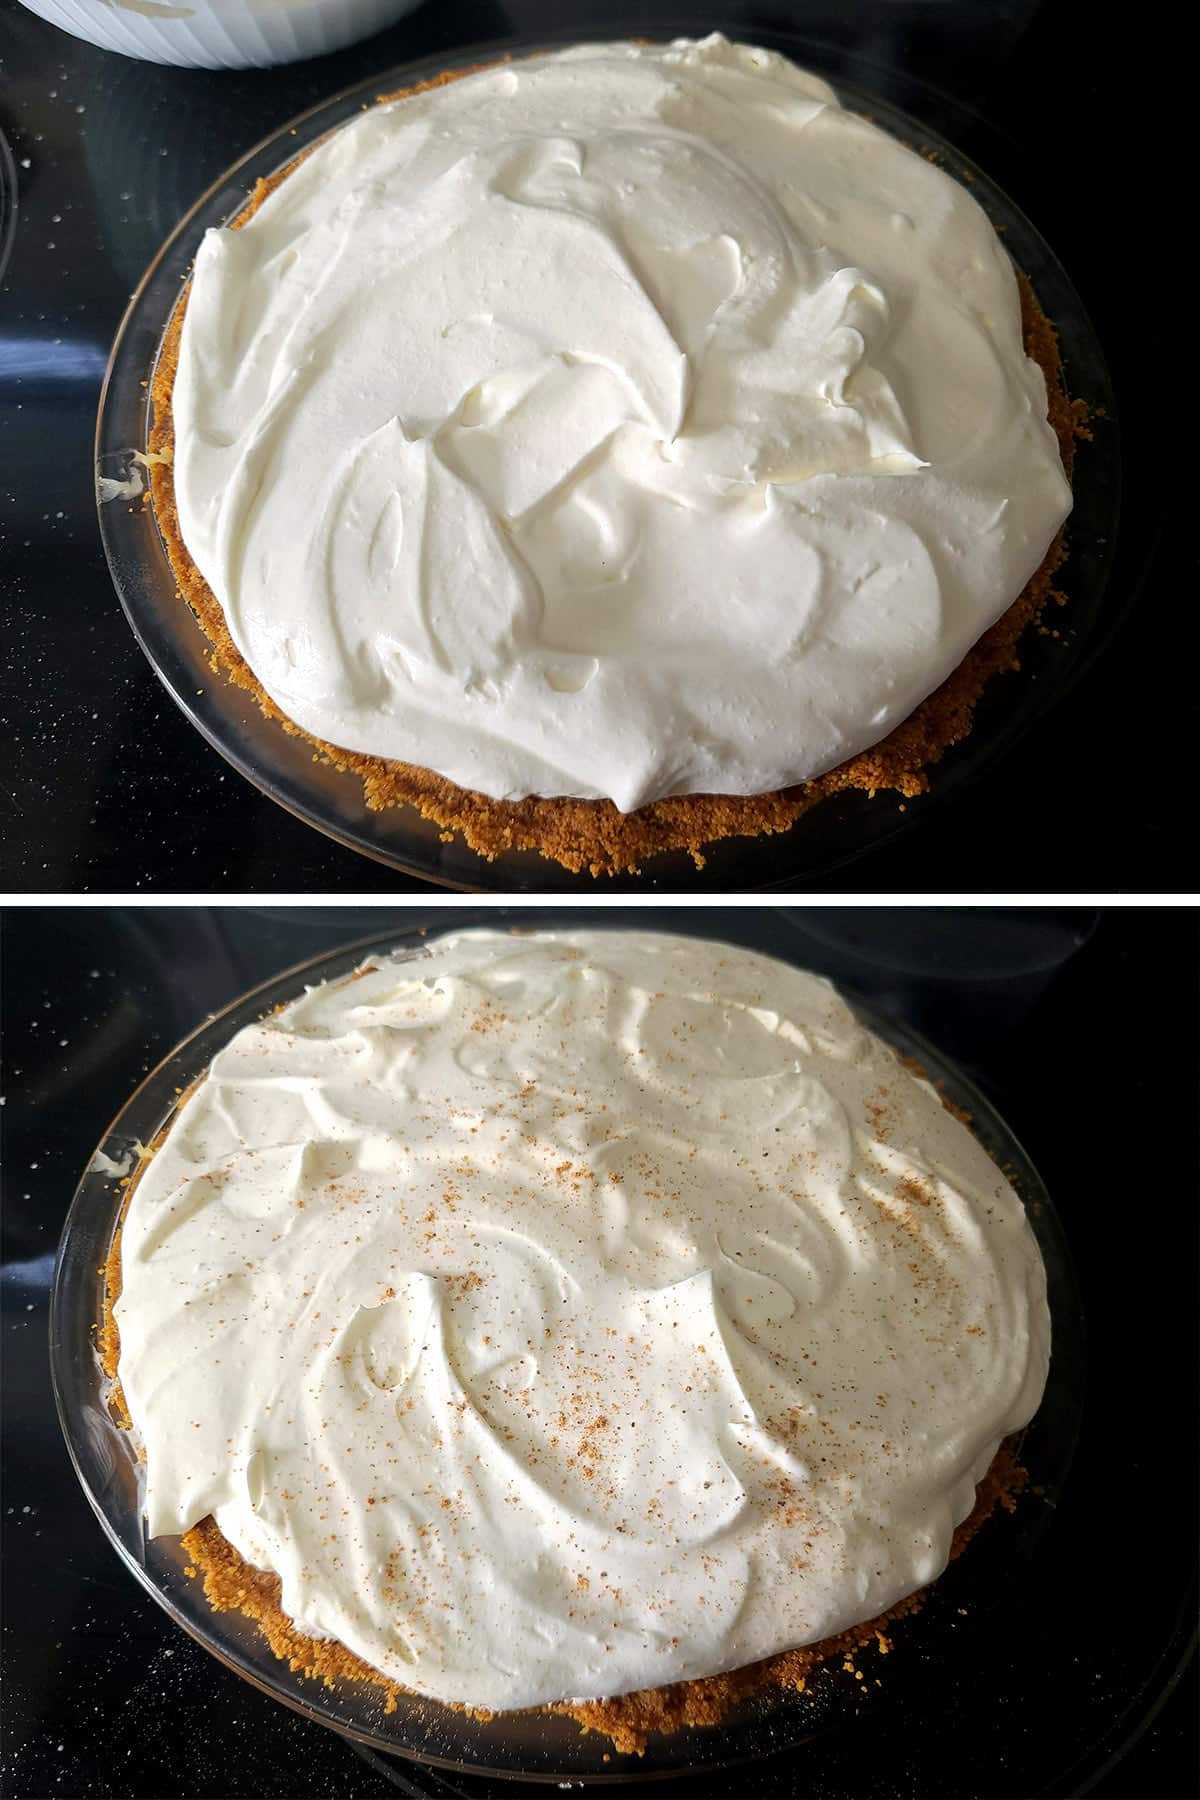 A 2 part image showing the pie topped with the eggnog whipped cream, then sprinkled with nutmeg.